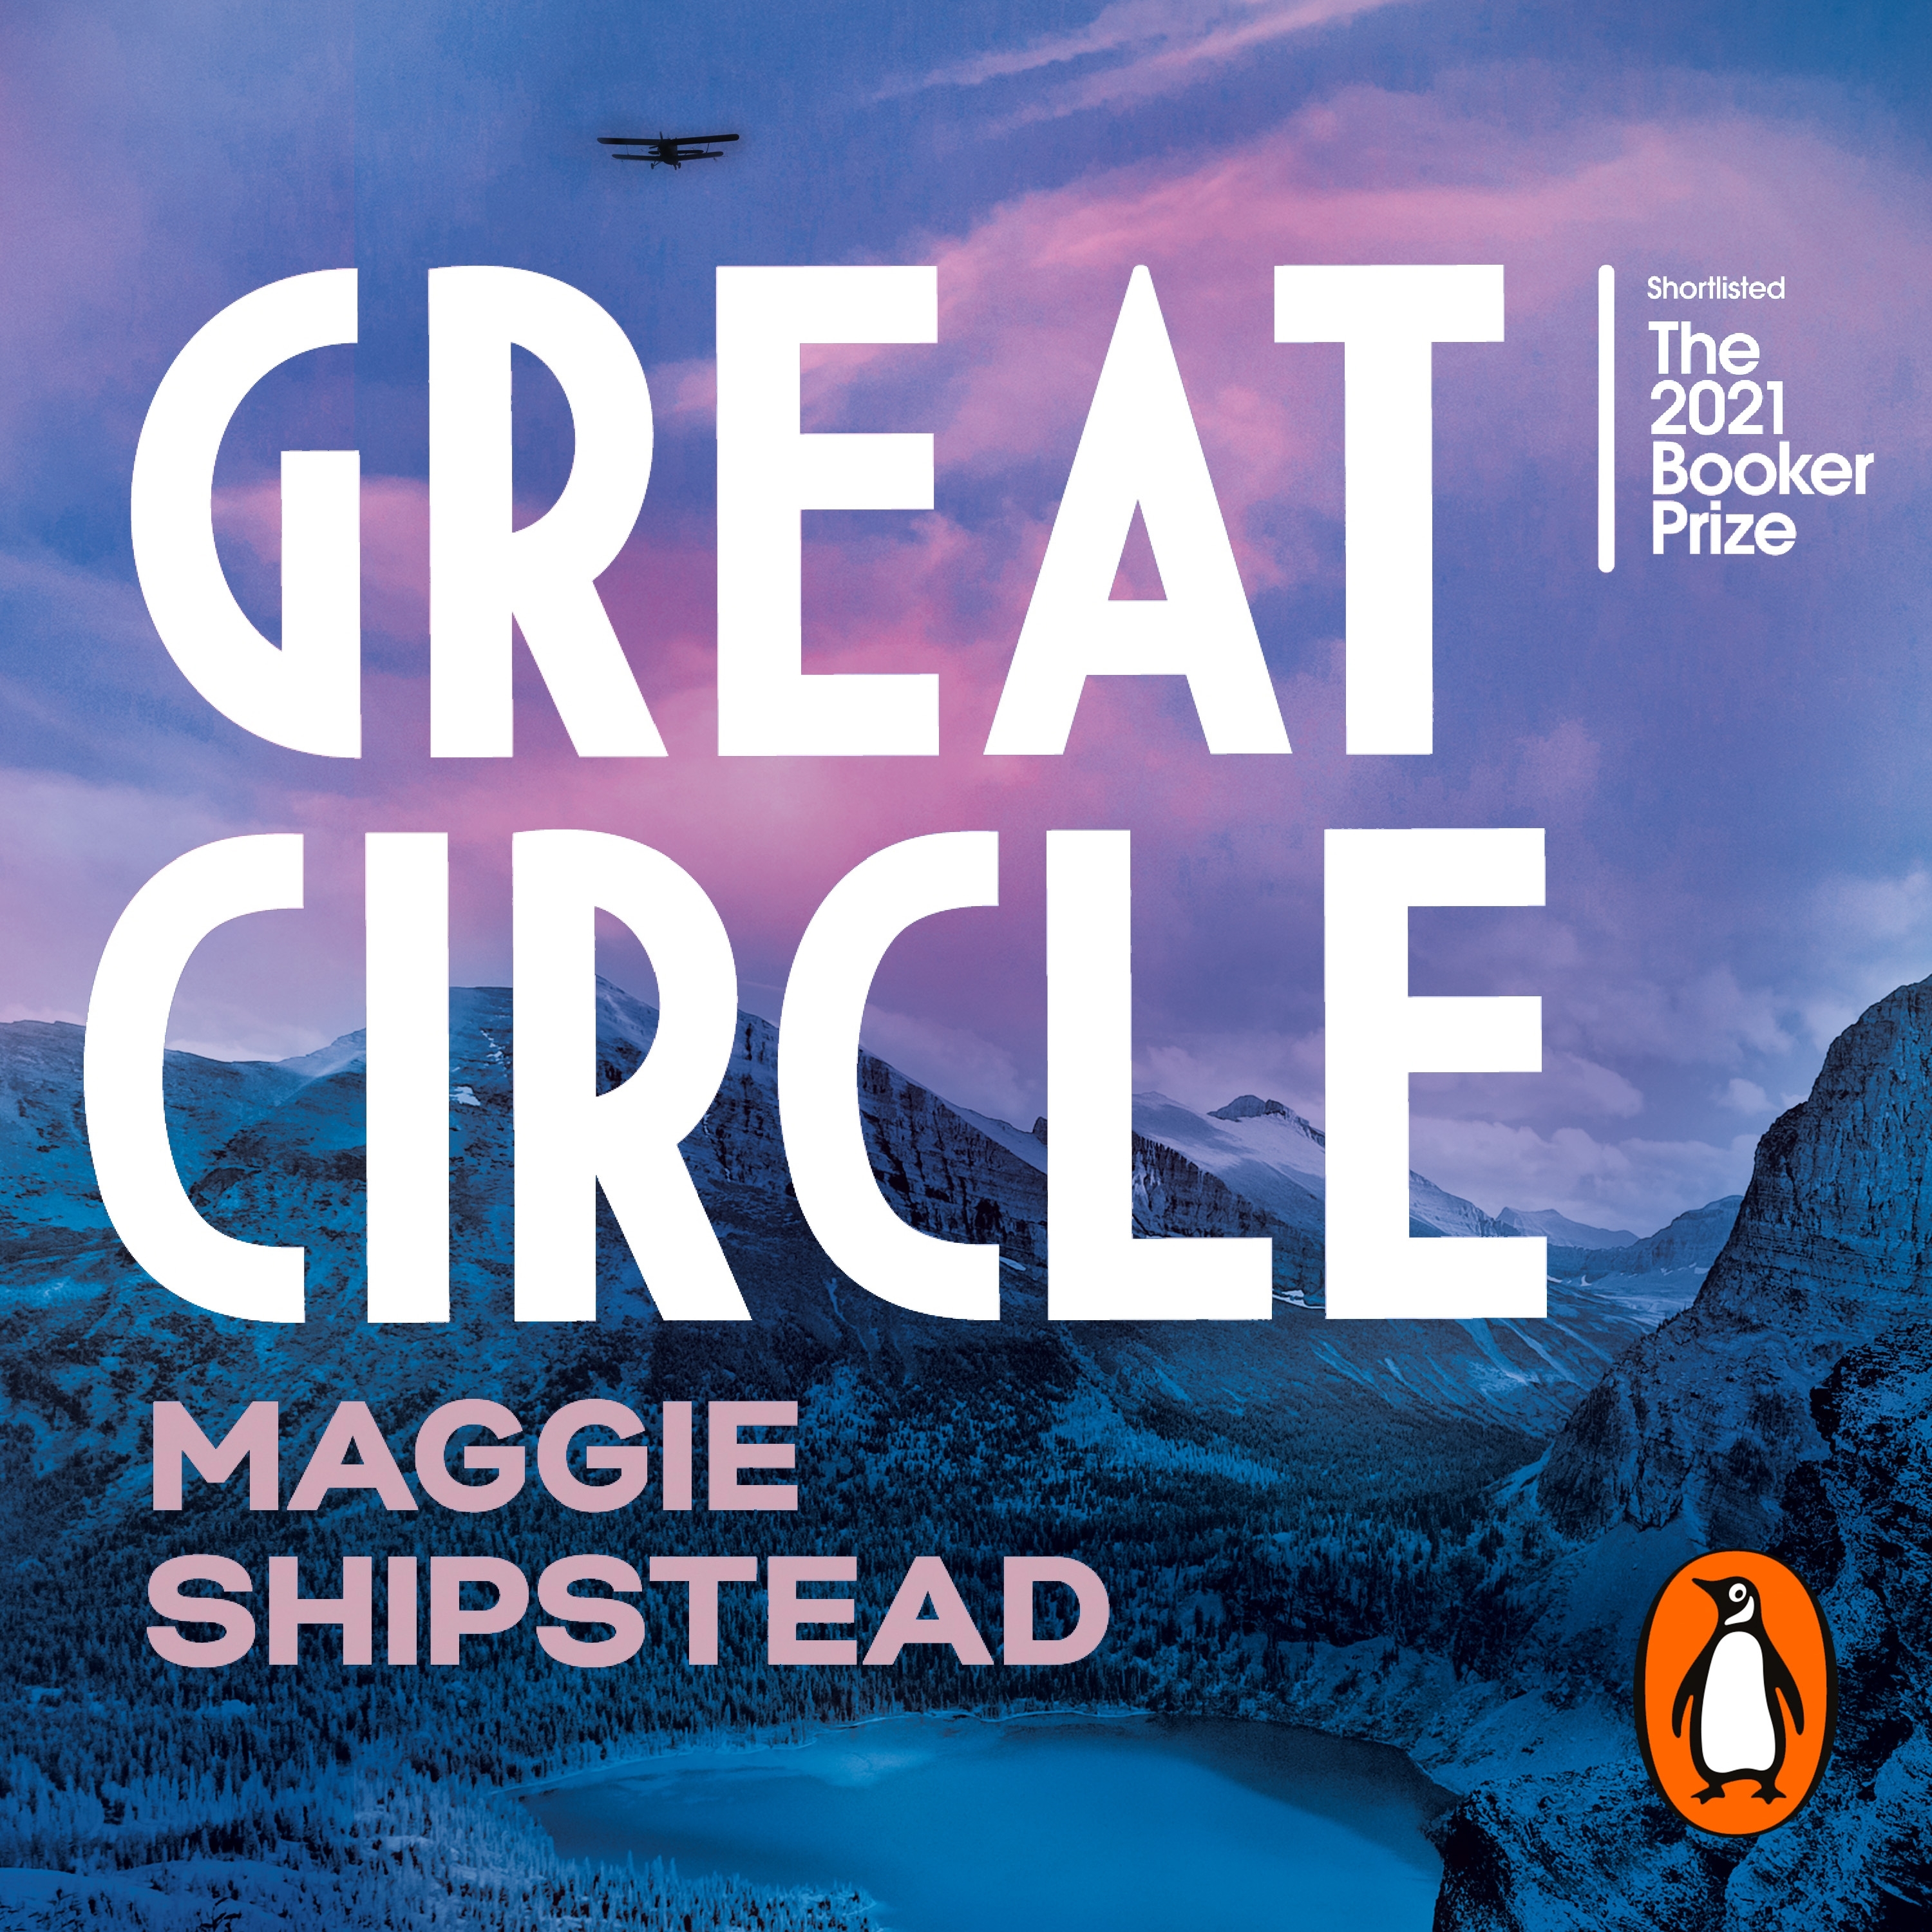 book review great circle by maggie shipstead